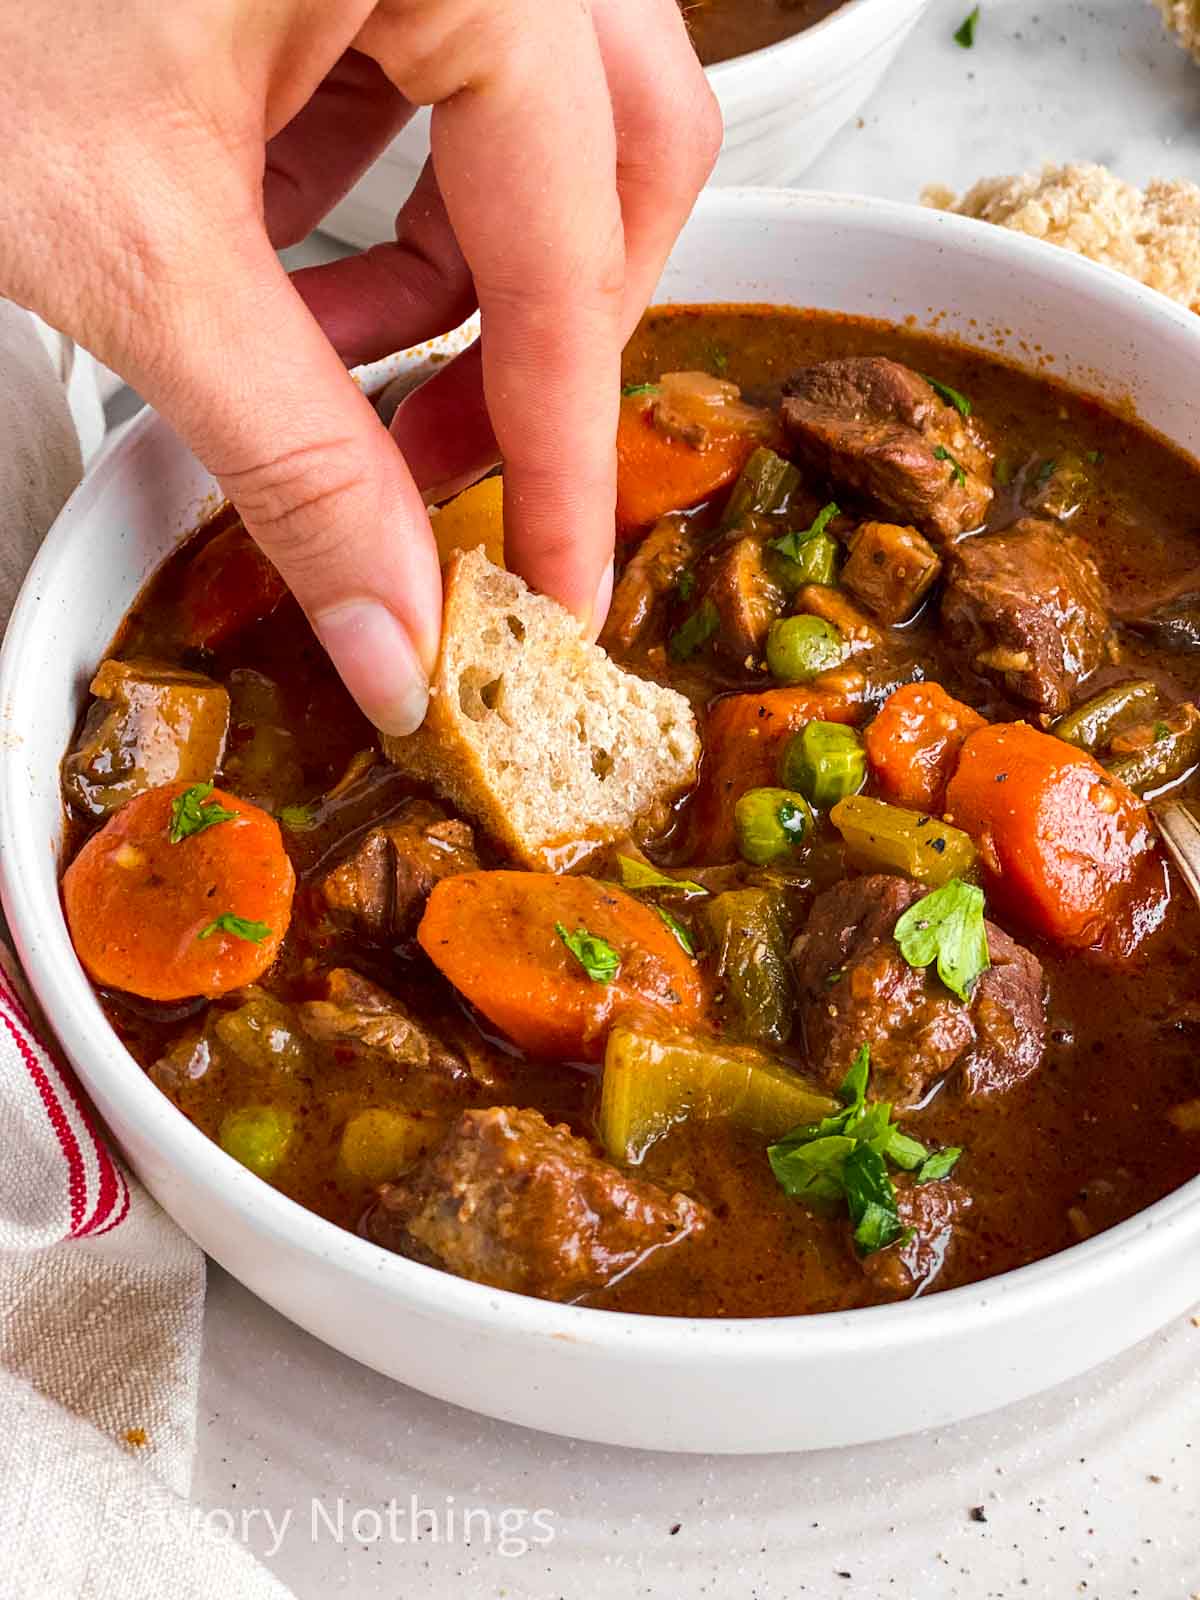 female hand dipping bread into bowl with beef stew